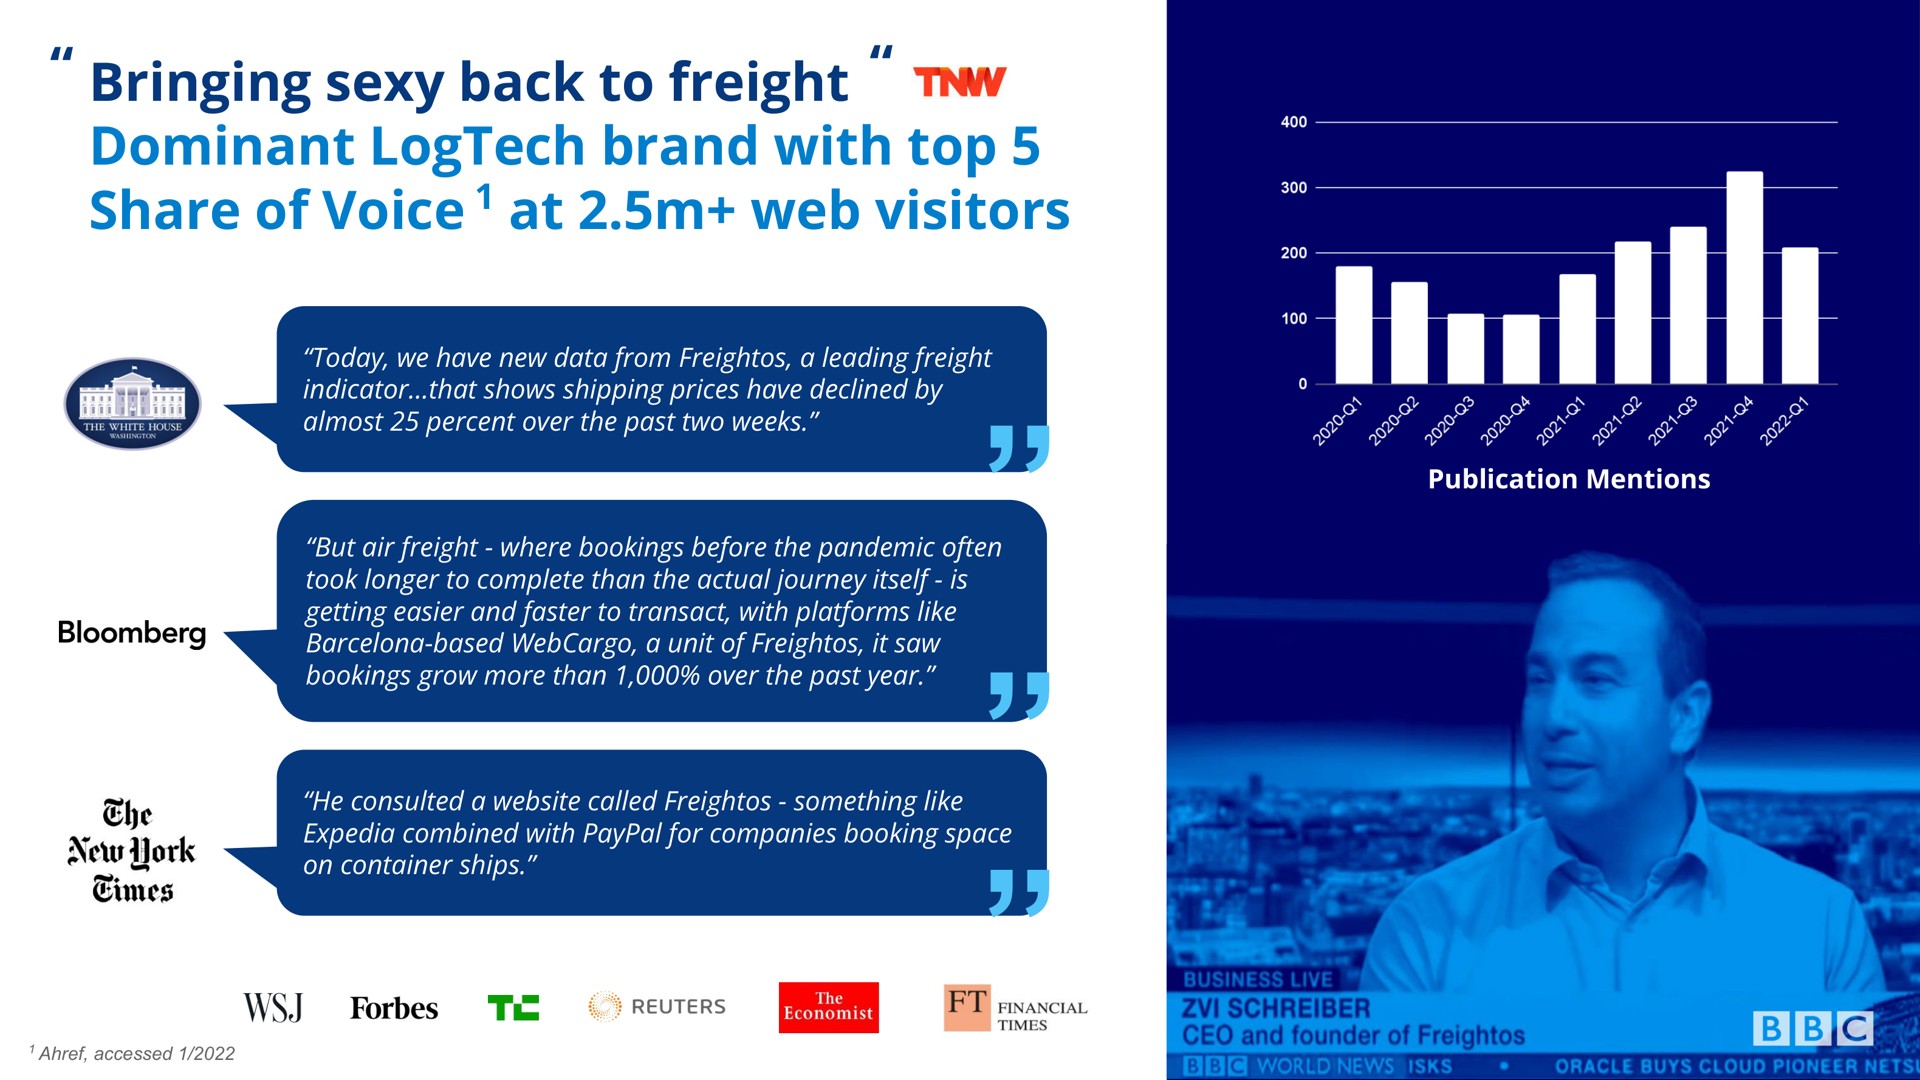 bringing sexy back to freight dominant brand with top share of voice at web visitors a | Freightos